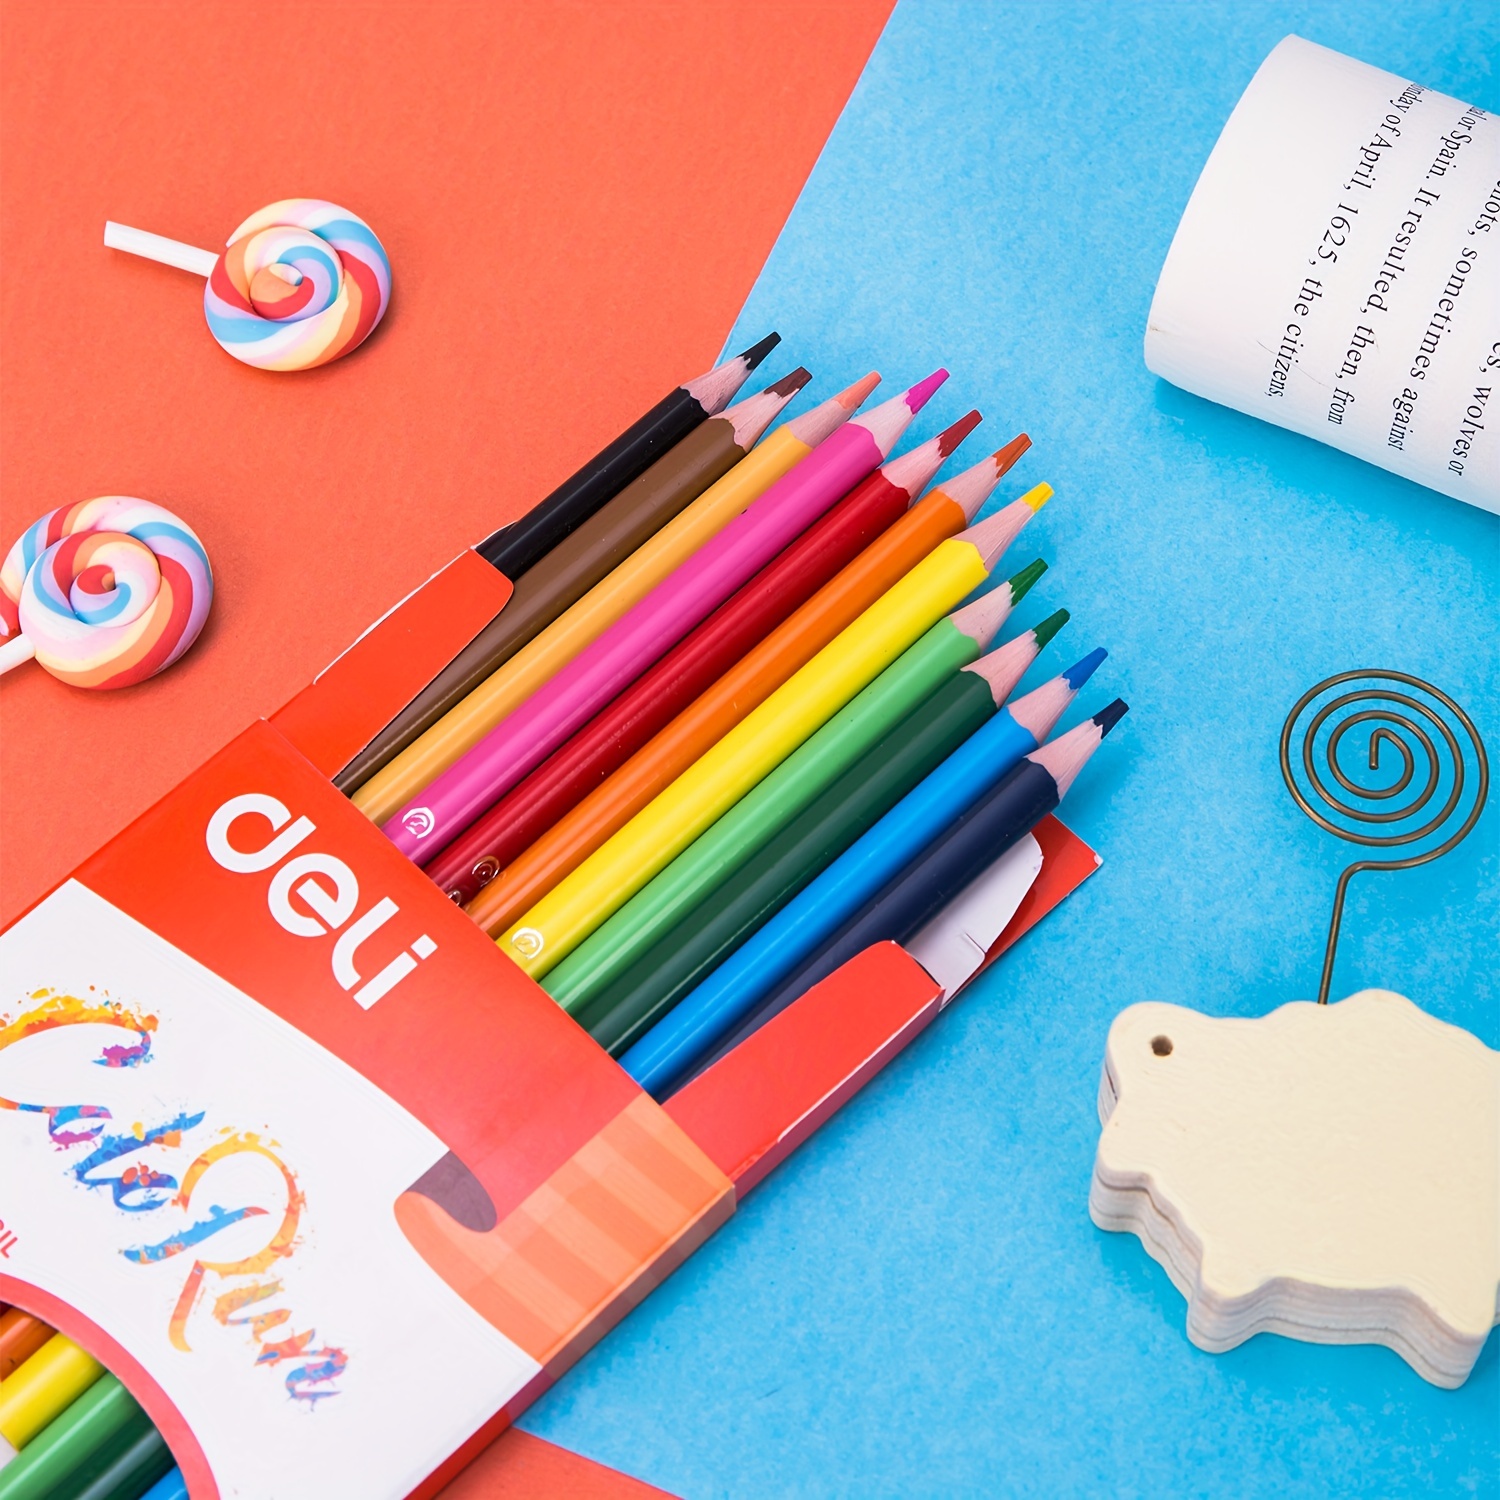 Auto-pencil For Kids Handwriting,with Pencil Grips,easy To Hold